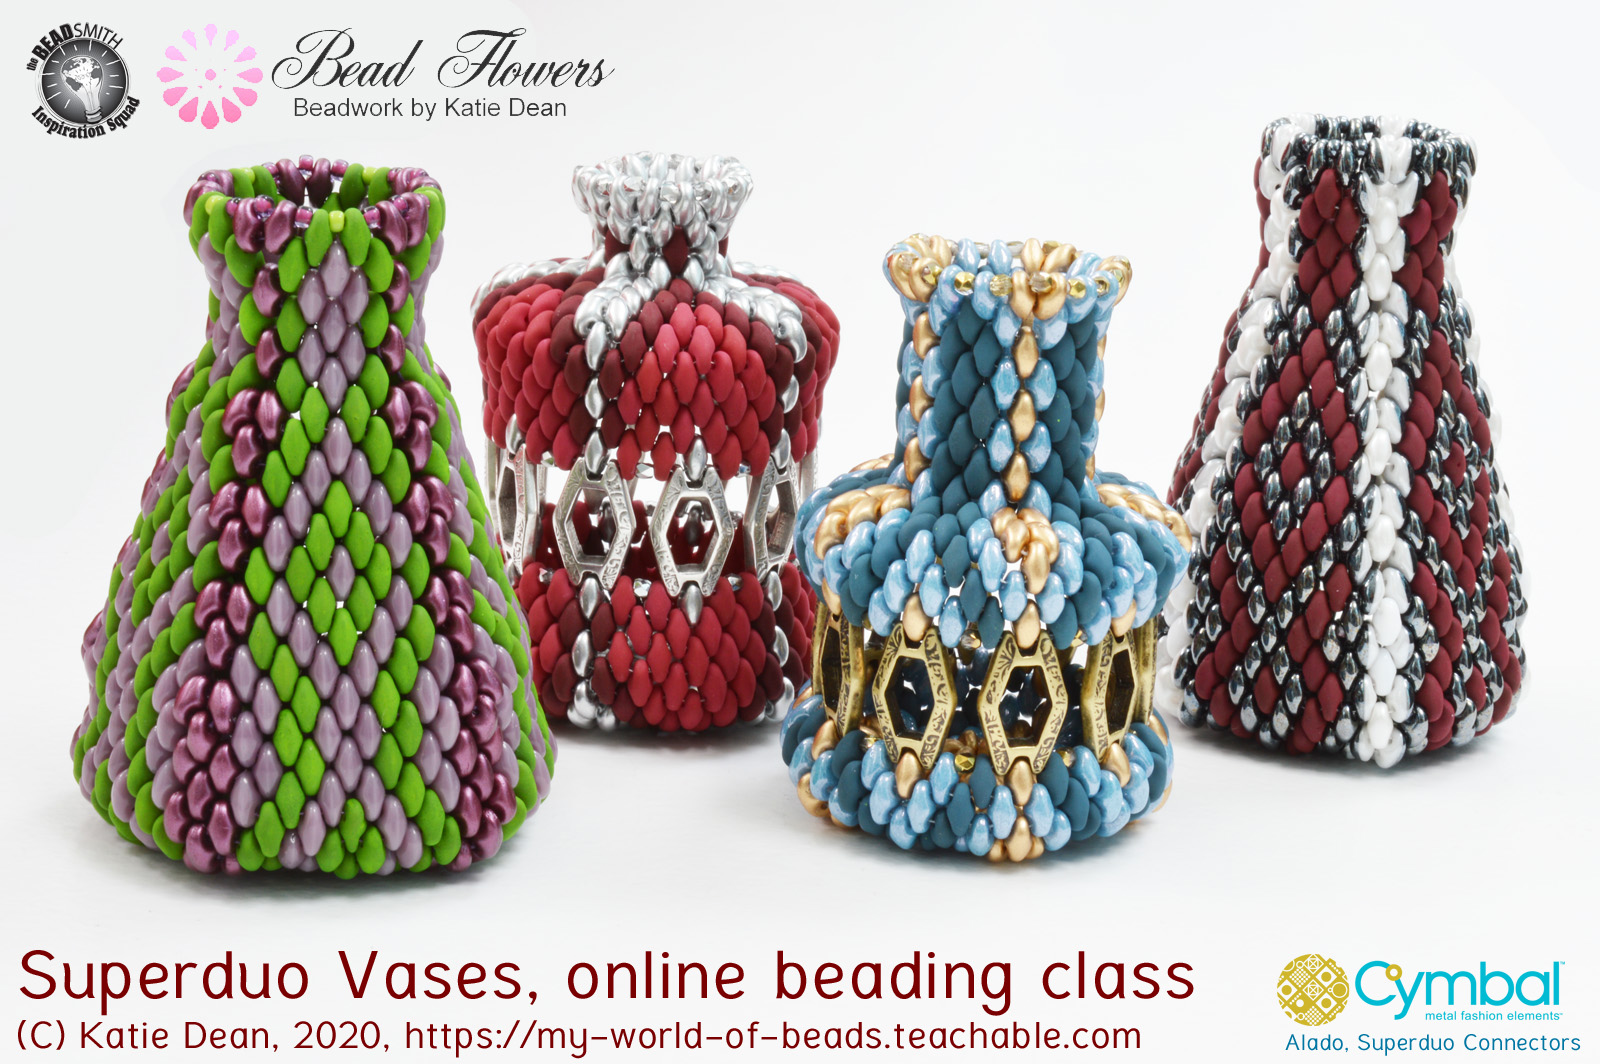 Superduo vases online beading class with Katie Dean, My World of Beads